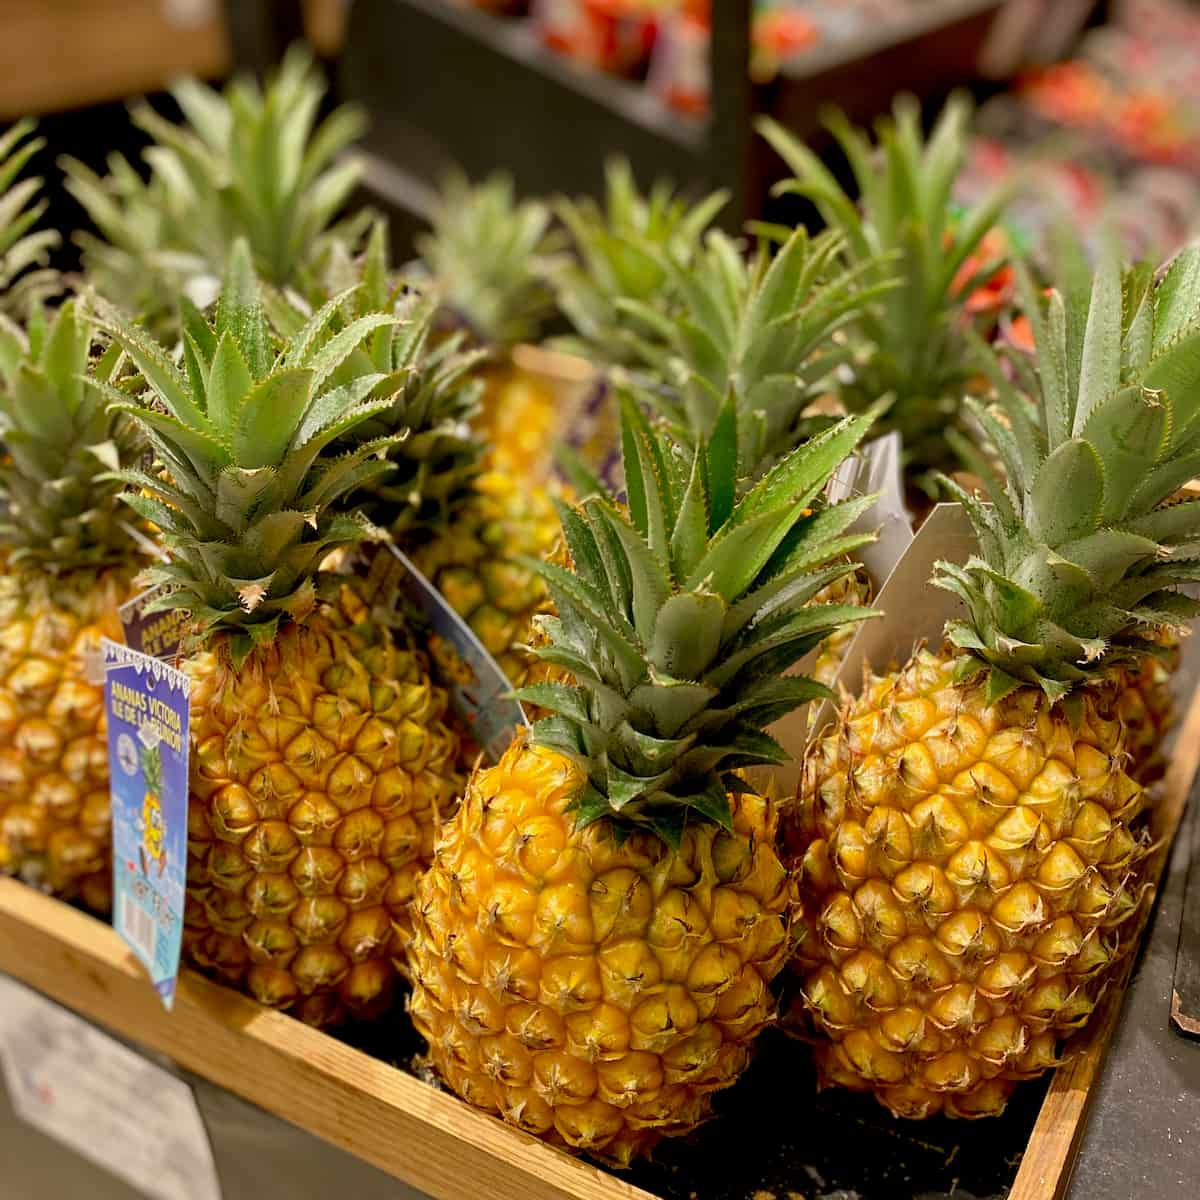 stand of pineapples with typical cone-like bodies and green spiky stalks